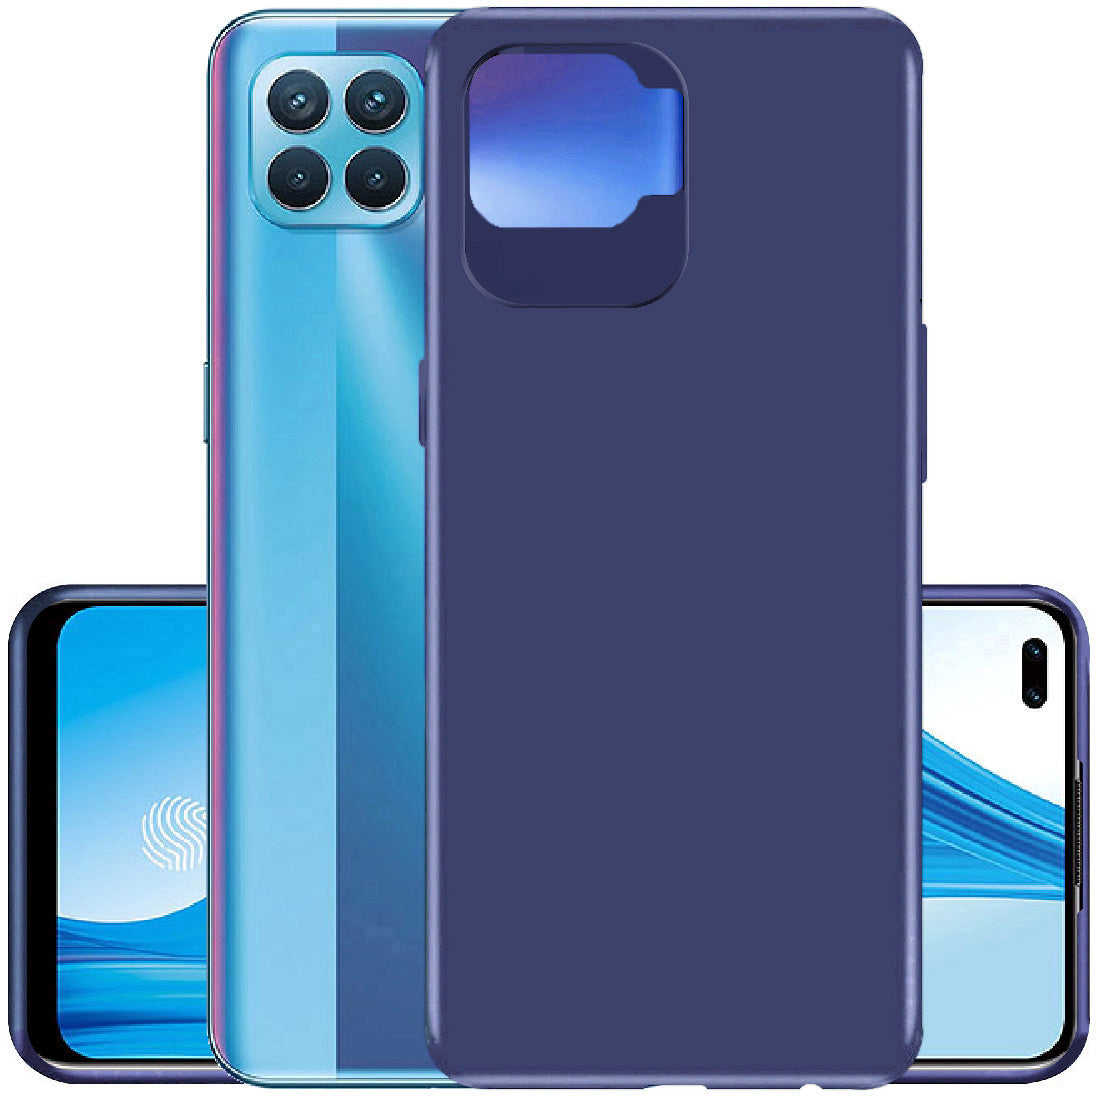 Matte Finish TPU Back Cover for Oppo F17 Pro / Oppo A93